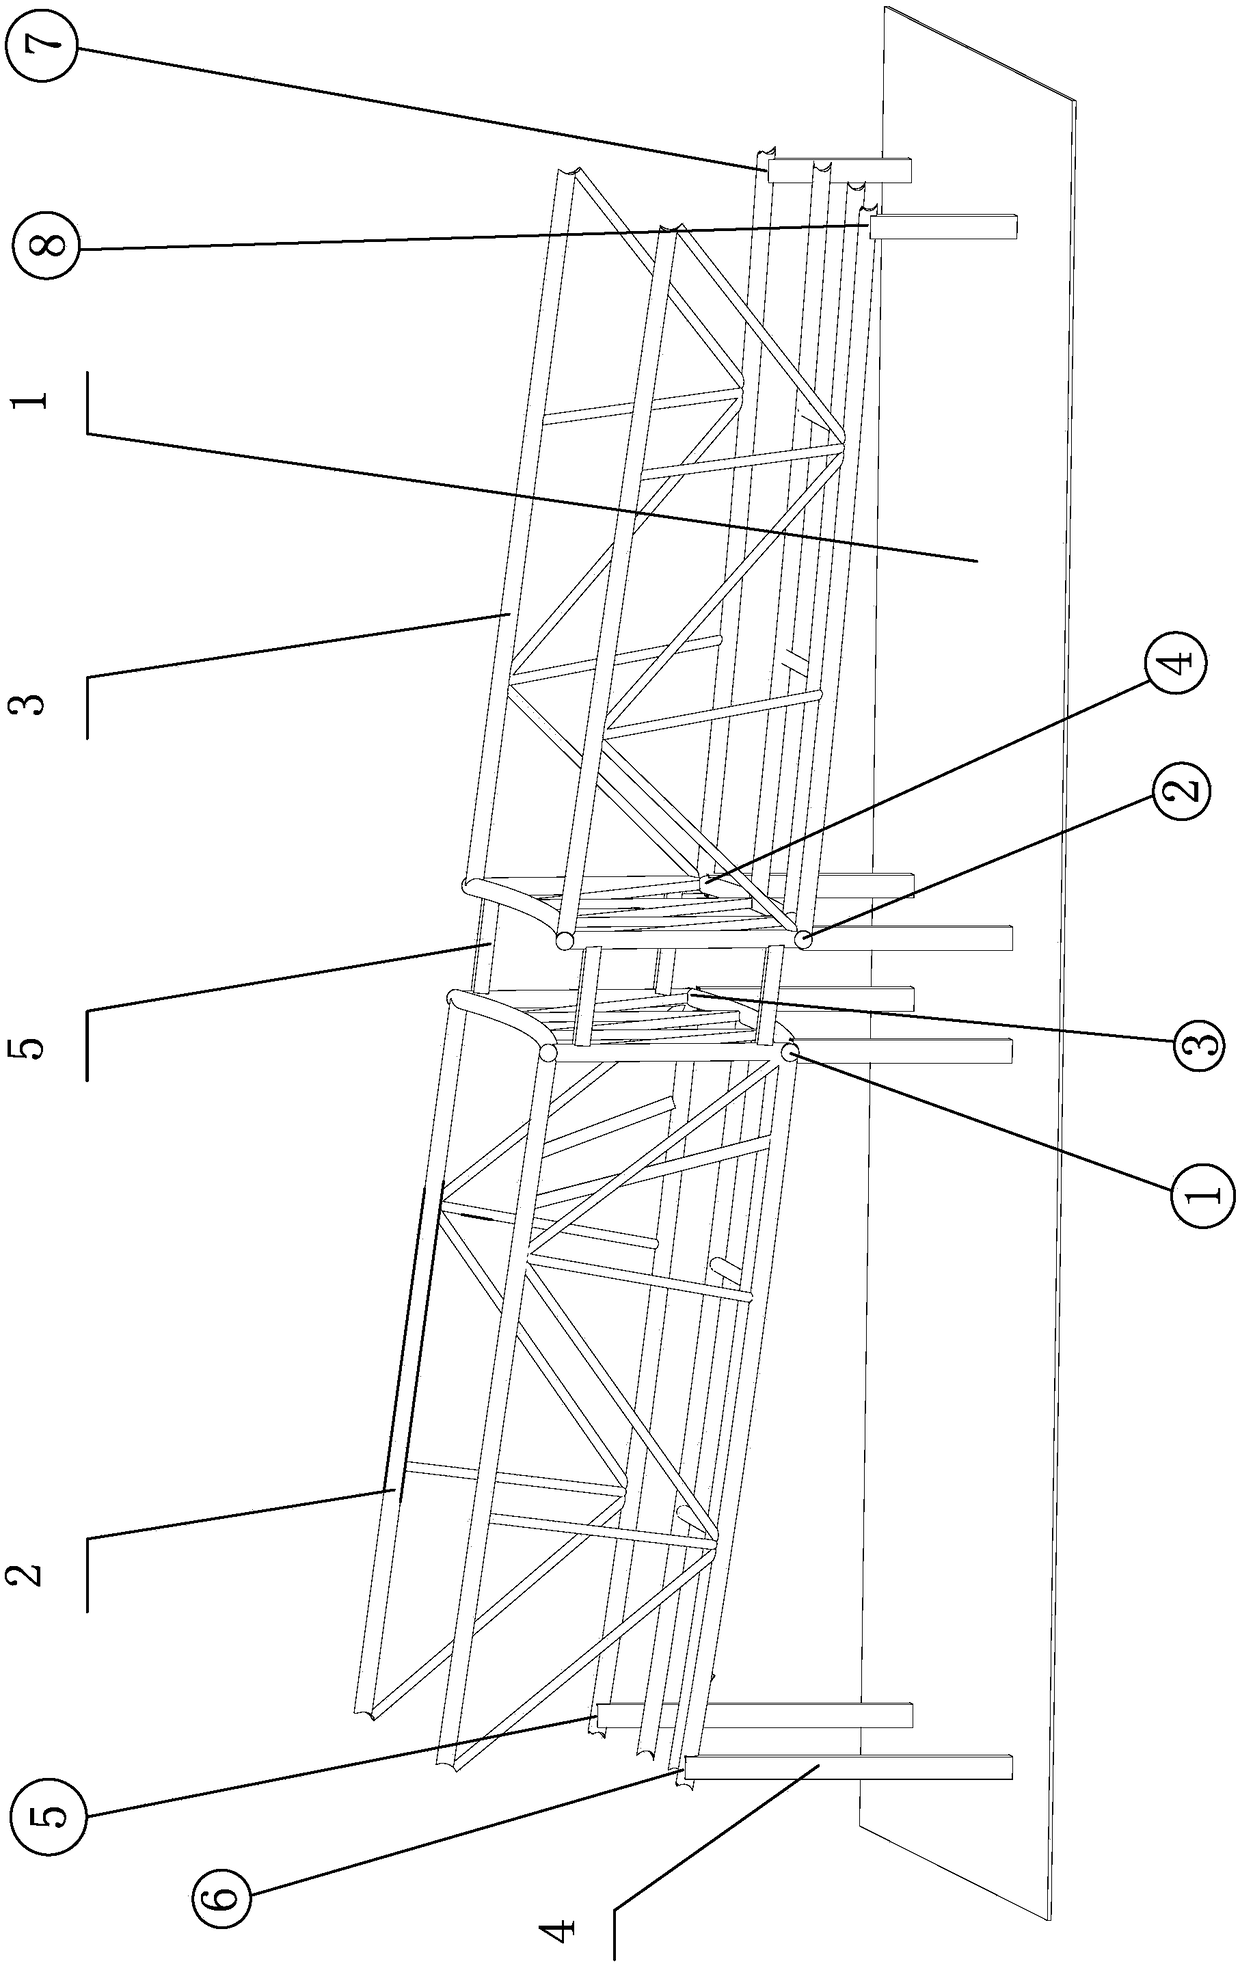 Method for installing spatial-bending-joint discontinuous tubular truss